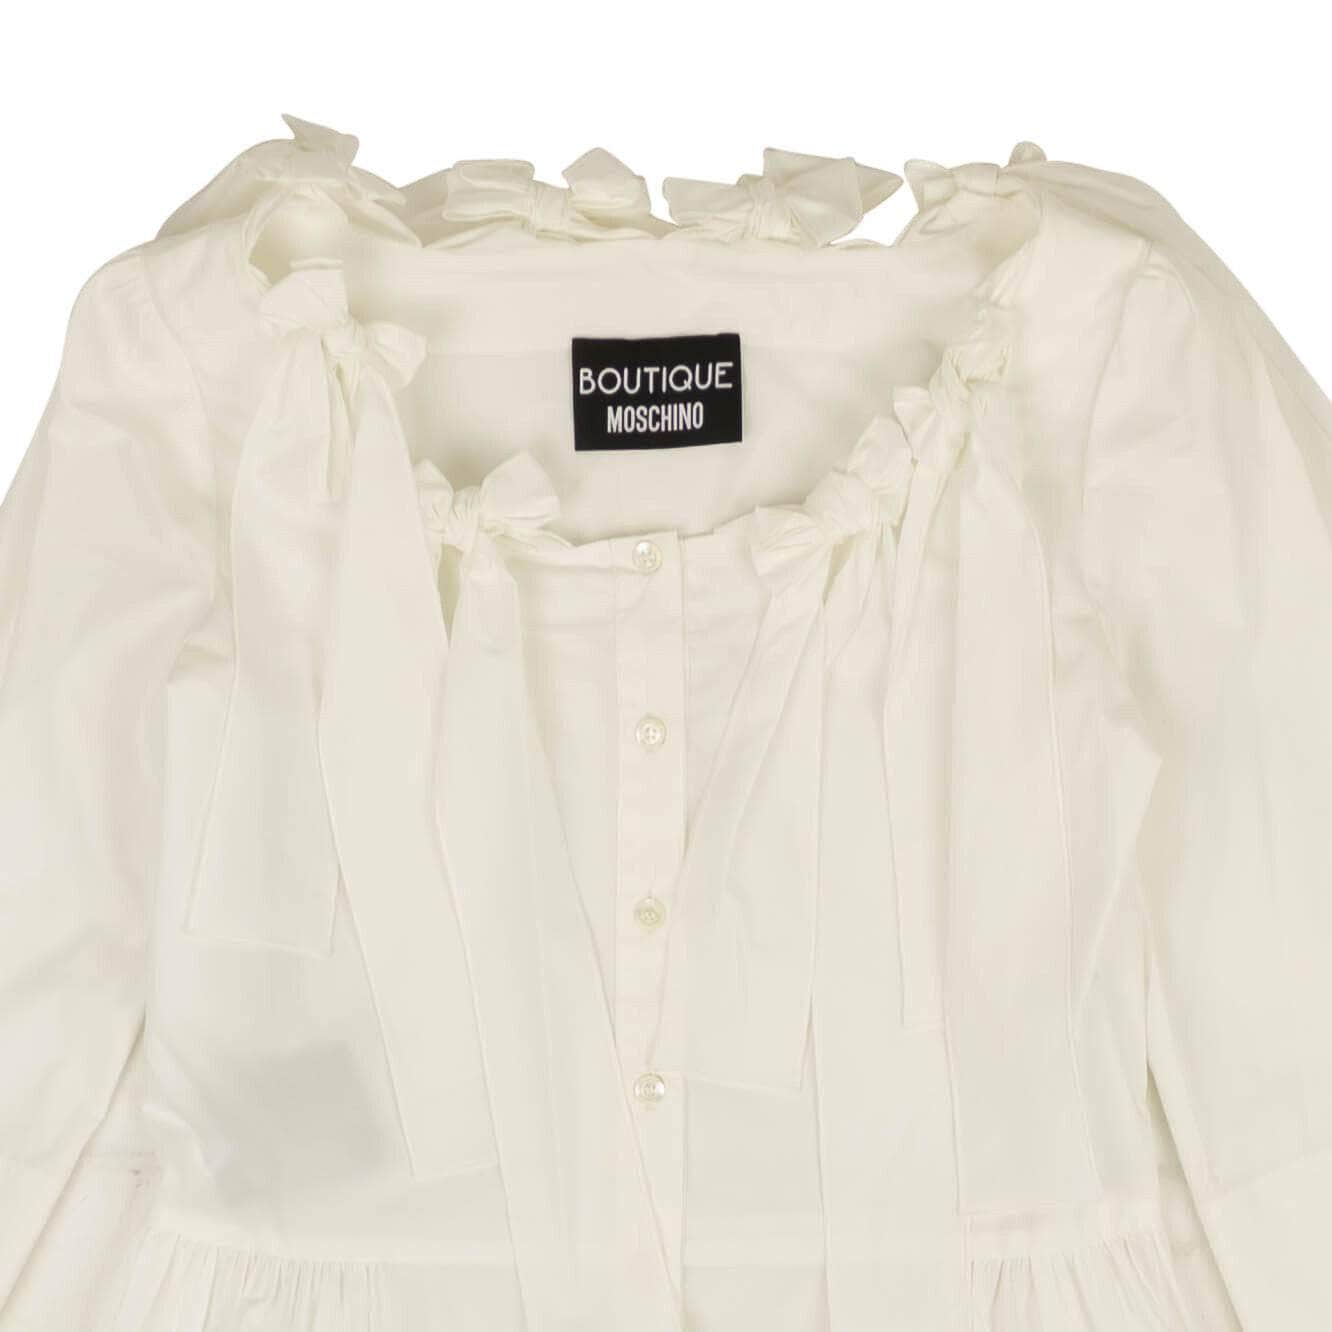 BOUTIQUE MOSCHINO boutique-moschino, channelenable-all, chicmi, couponcollection, gender-womens, main-clothing, size-36, size-38, size-40, size-42, size-44, size-46, size-48, under-250, womens-day-dresses White Bow Accented Fit And Flare Mini Dress